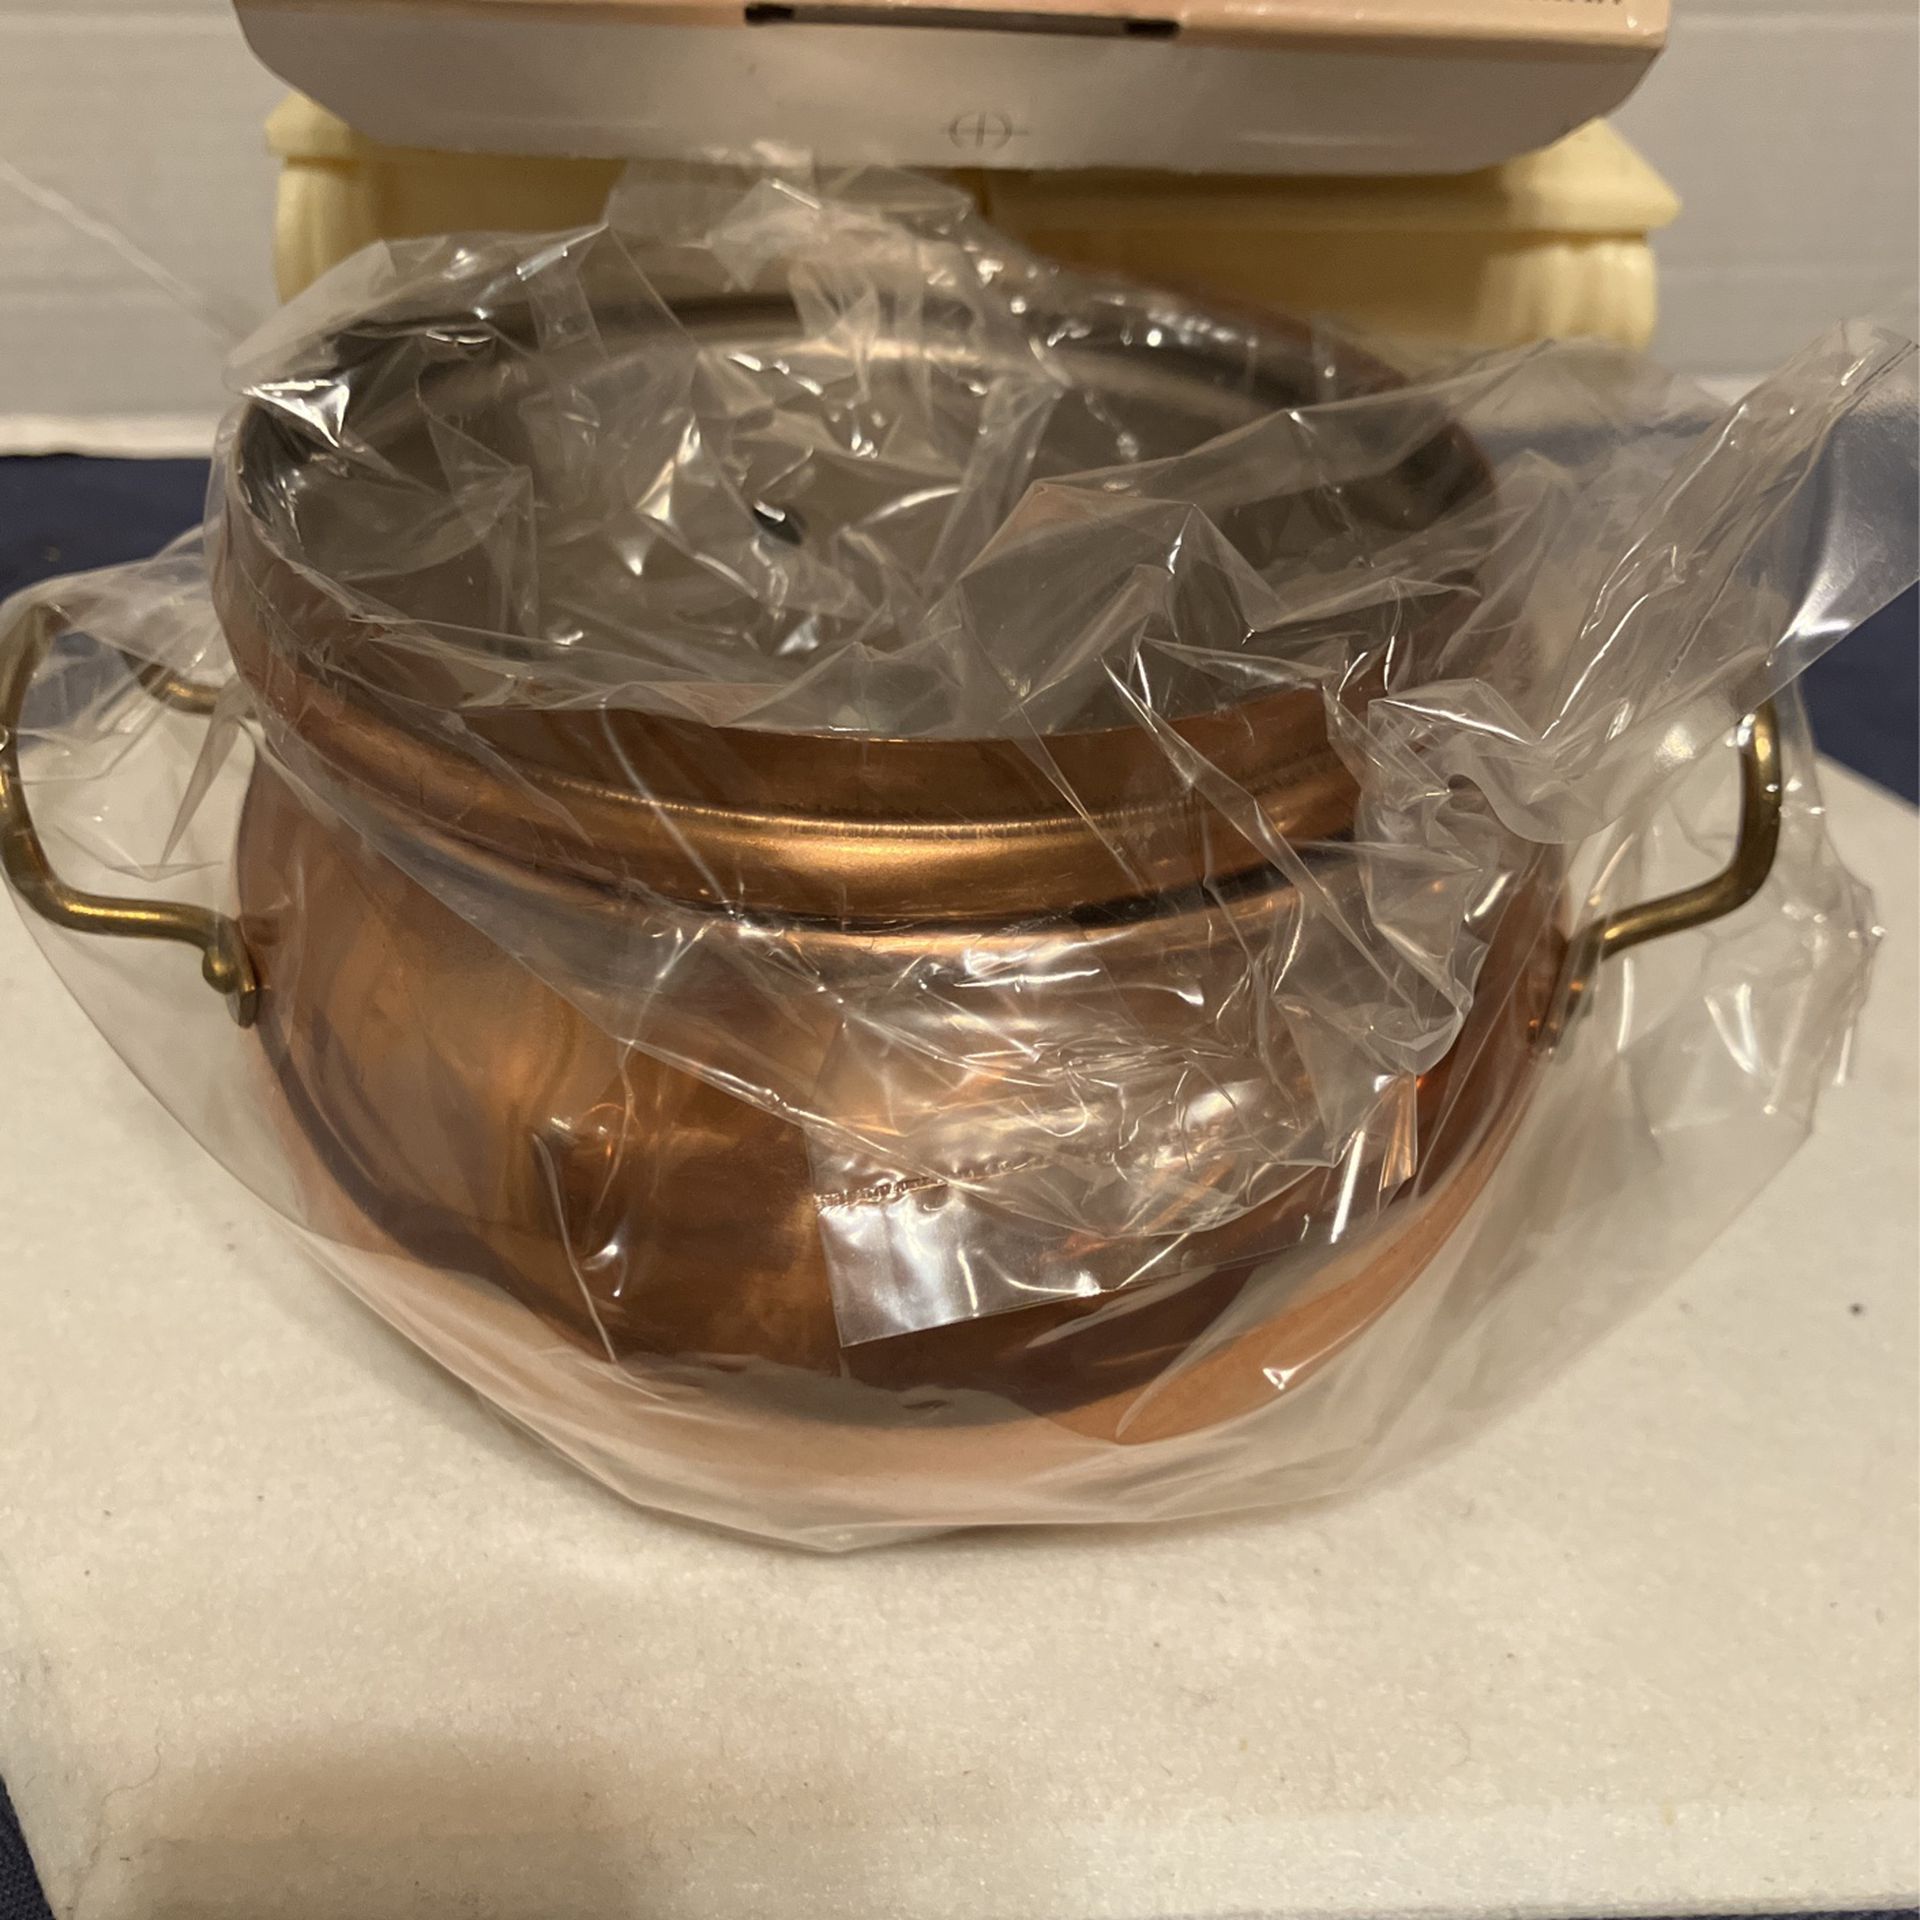 Potpourri Pot for Sale in Raleigh, NC - OfferUp